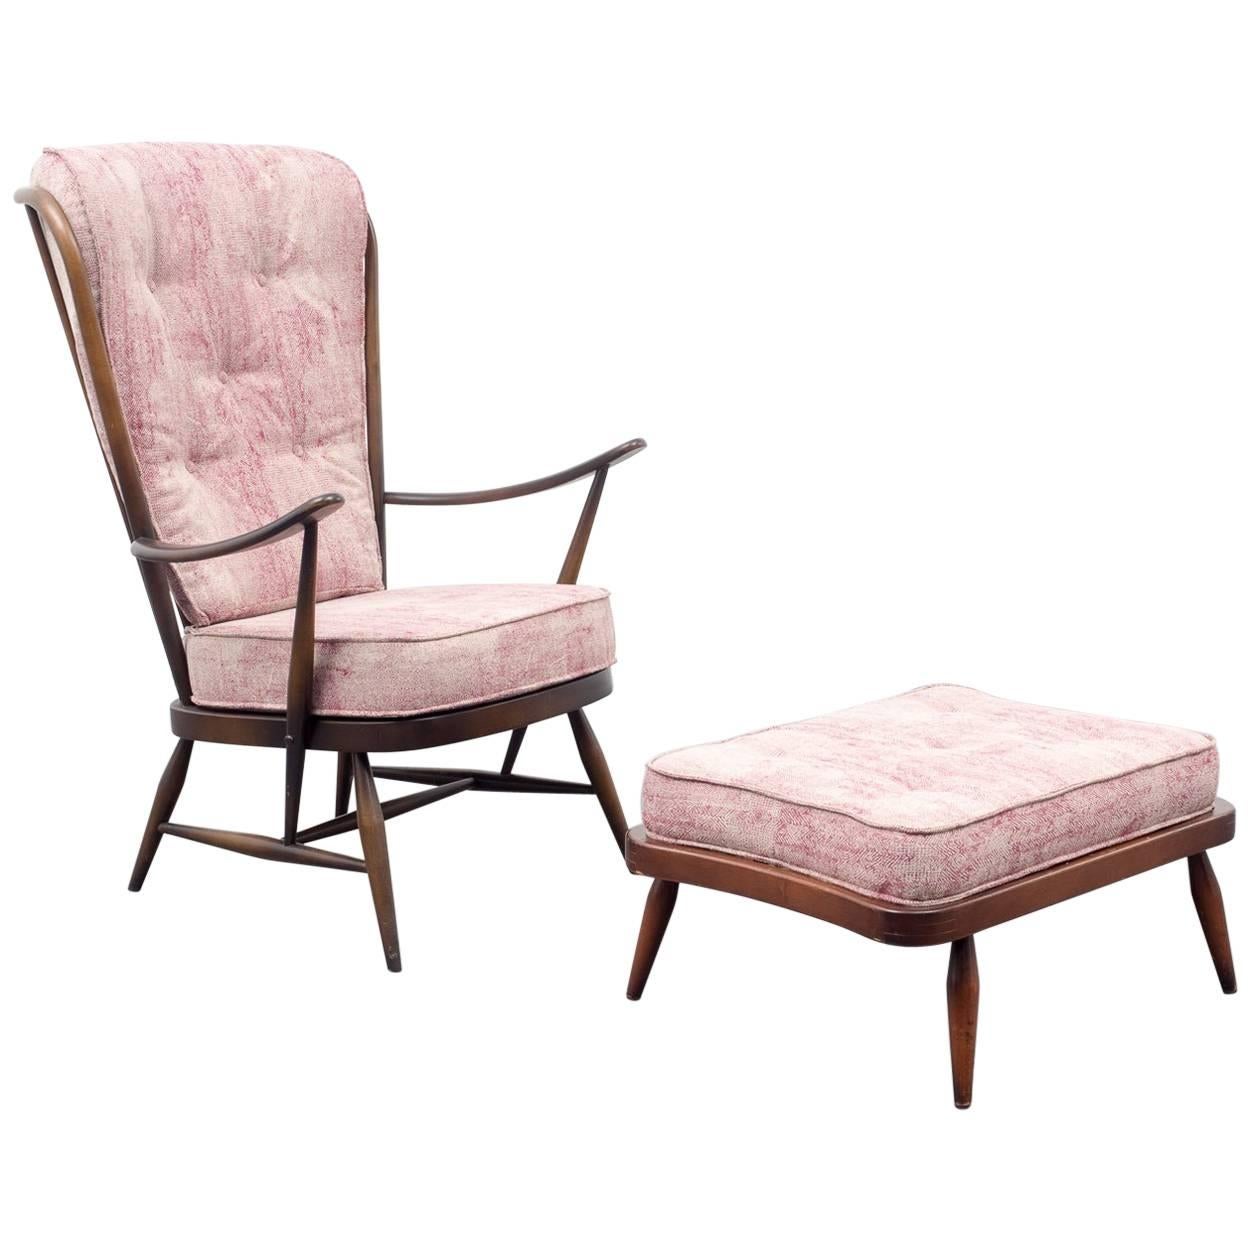 1950s Armchair and Ottoman, L. Ercolani for Ercol, New Upholstery For Sale